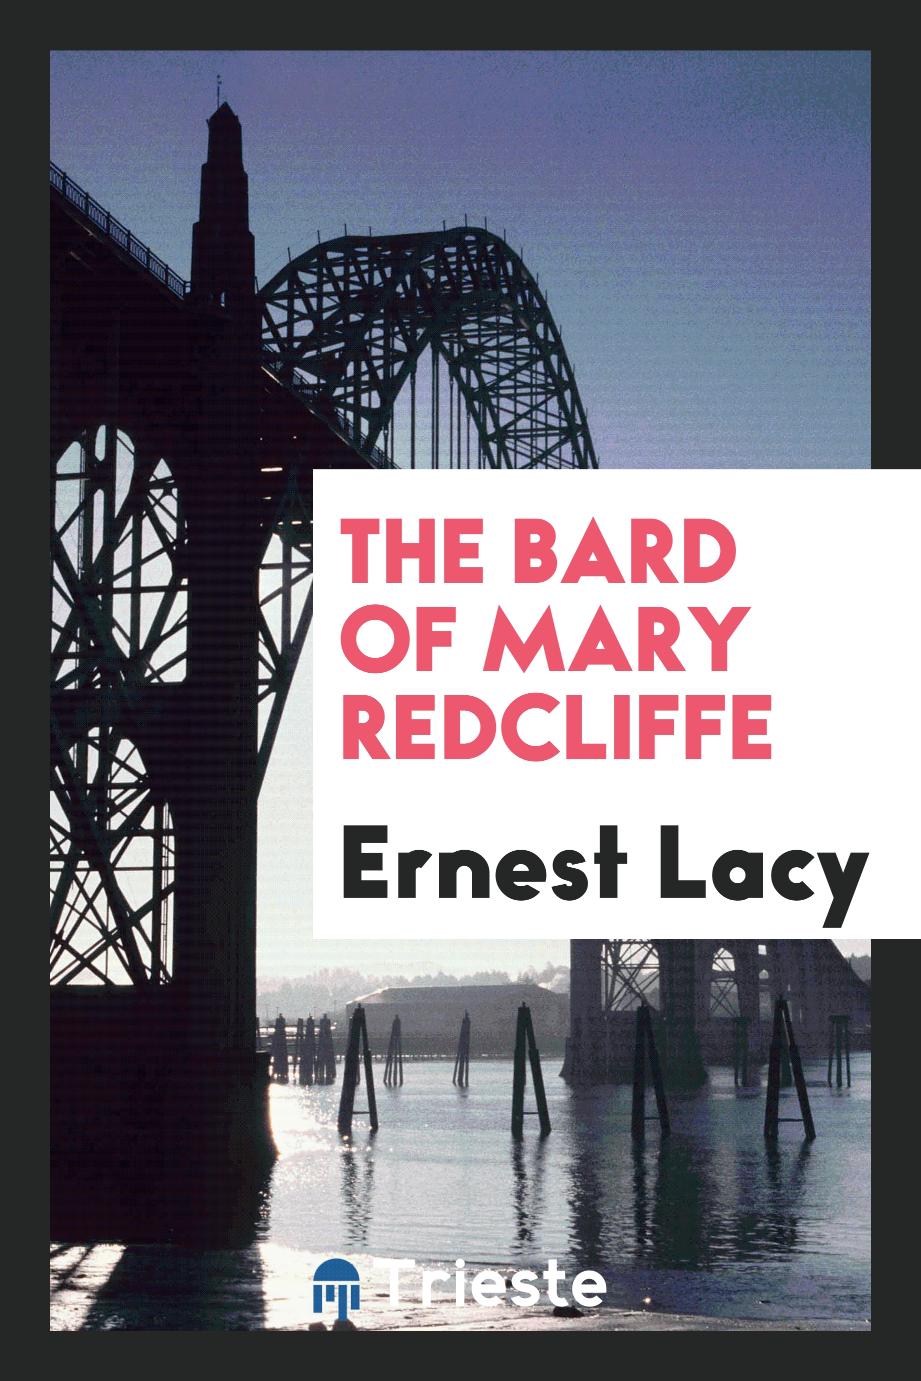 The bard of Mary Redcliffe